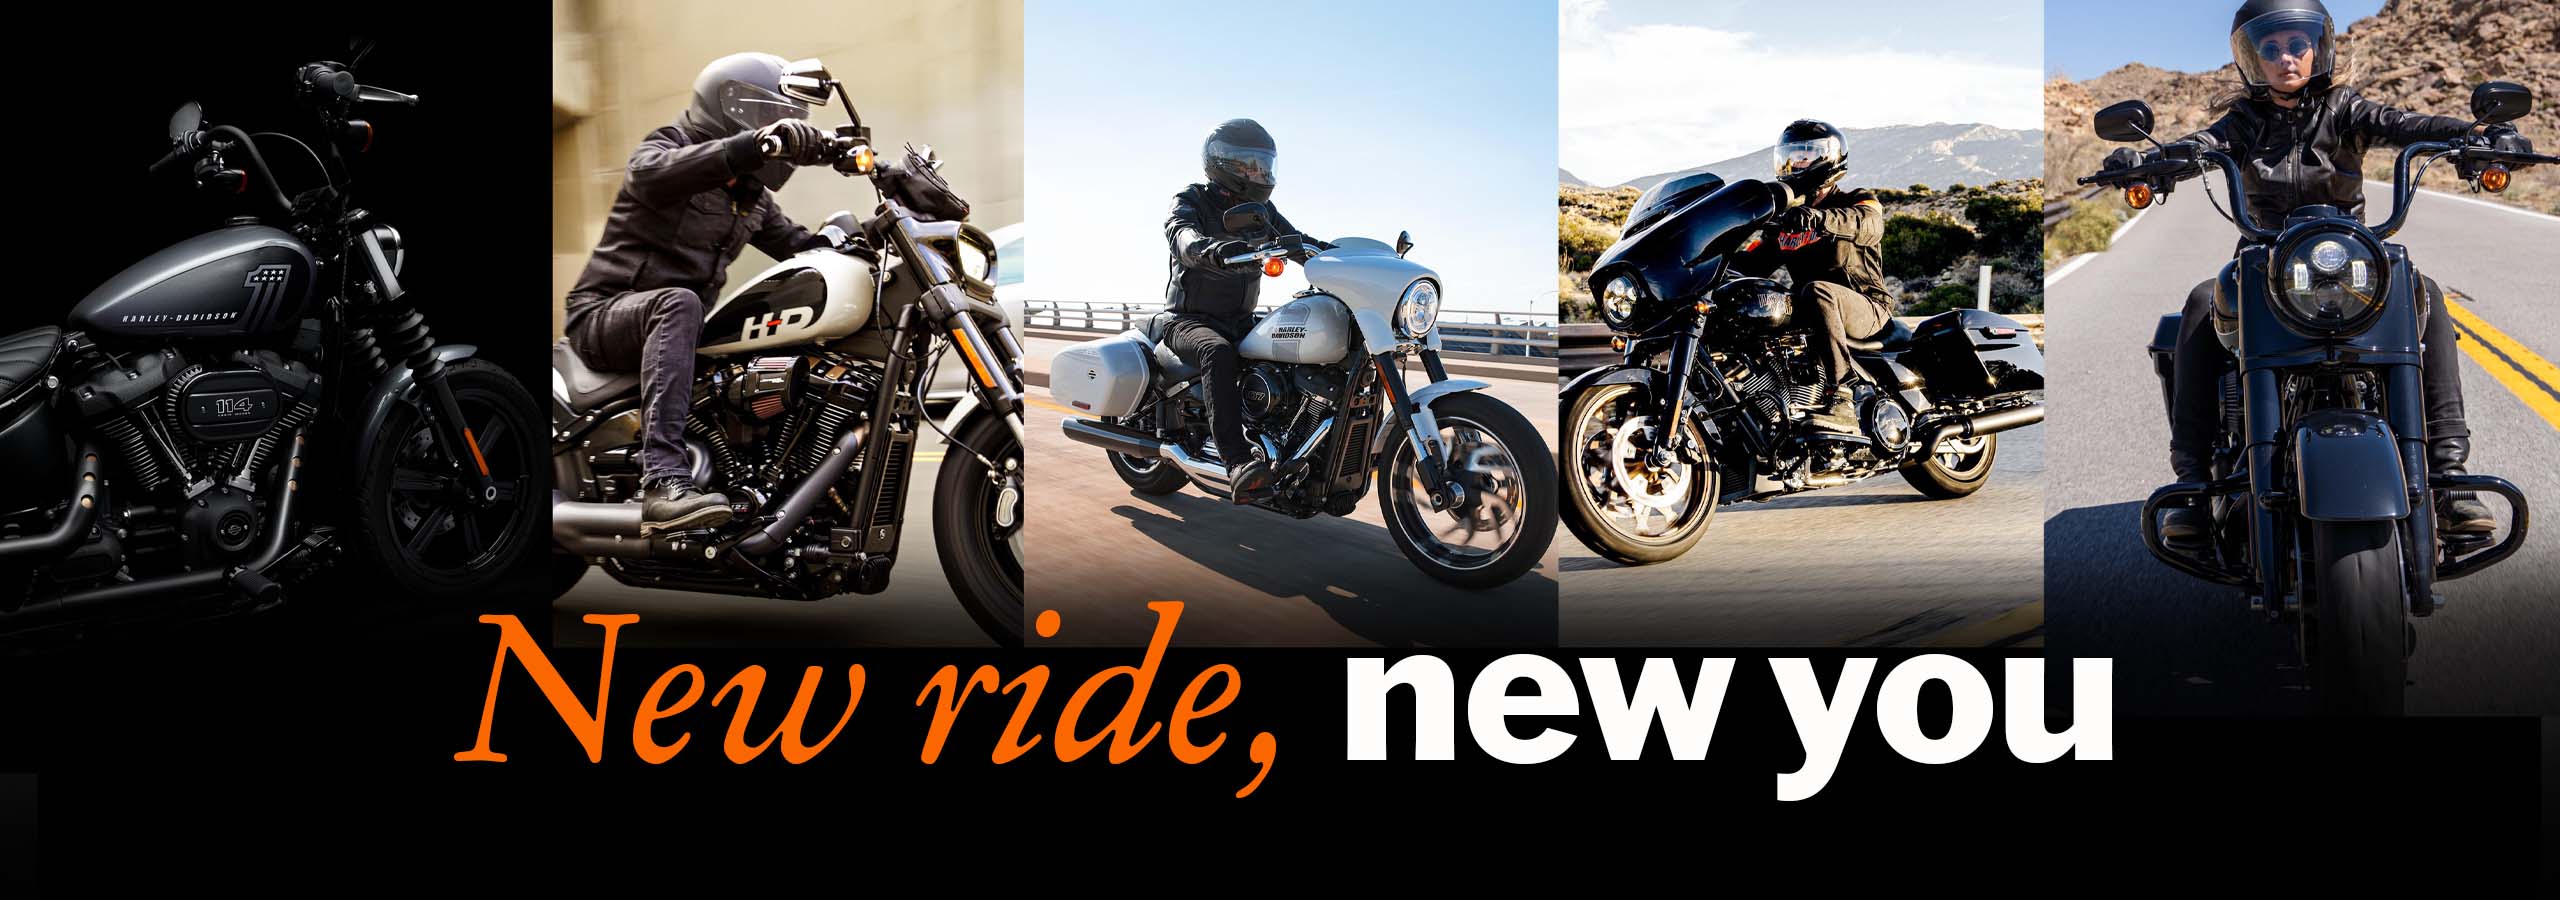 Enjoy a £500 deposit contribution when you purchase your new Softail or Touring Harley-Davidson motorcycle with 11.7% APR representative HP/PCP finance.